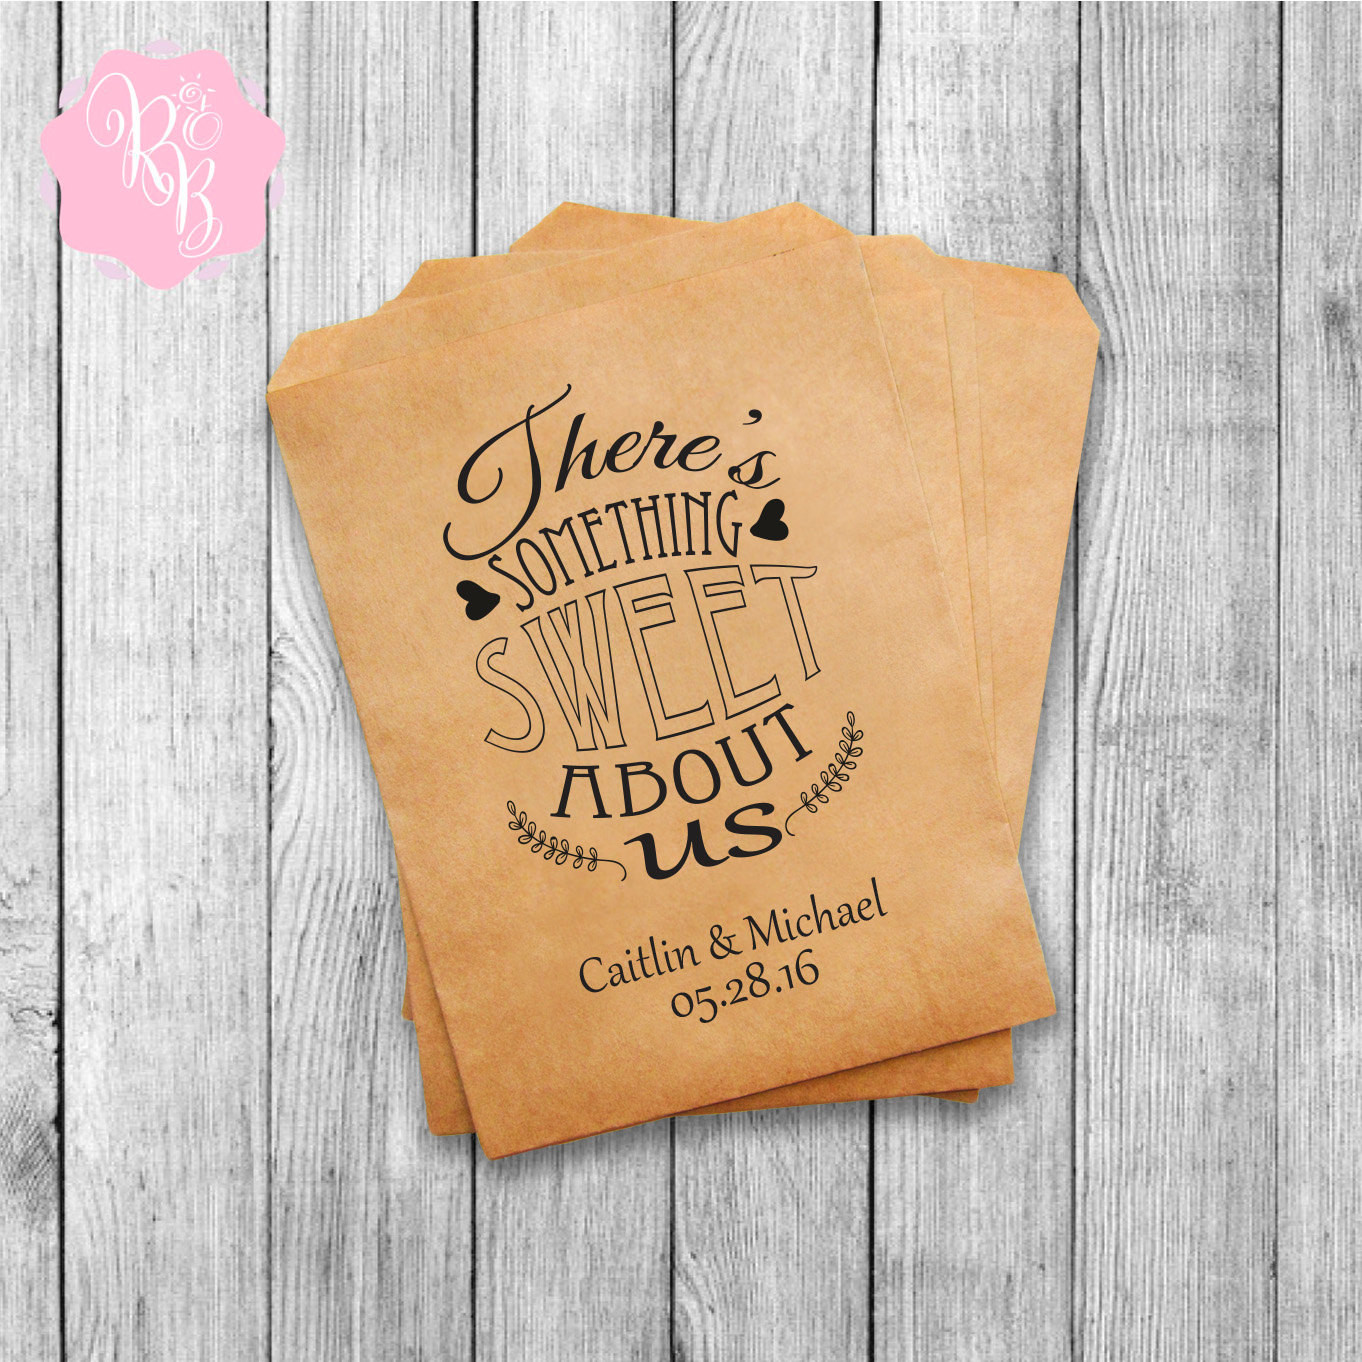 Personalized Wedding Favor Bags
 Set of 20 Wedding Favor Bags Wedding Favors Personalized